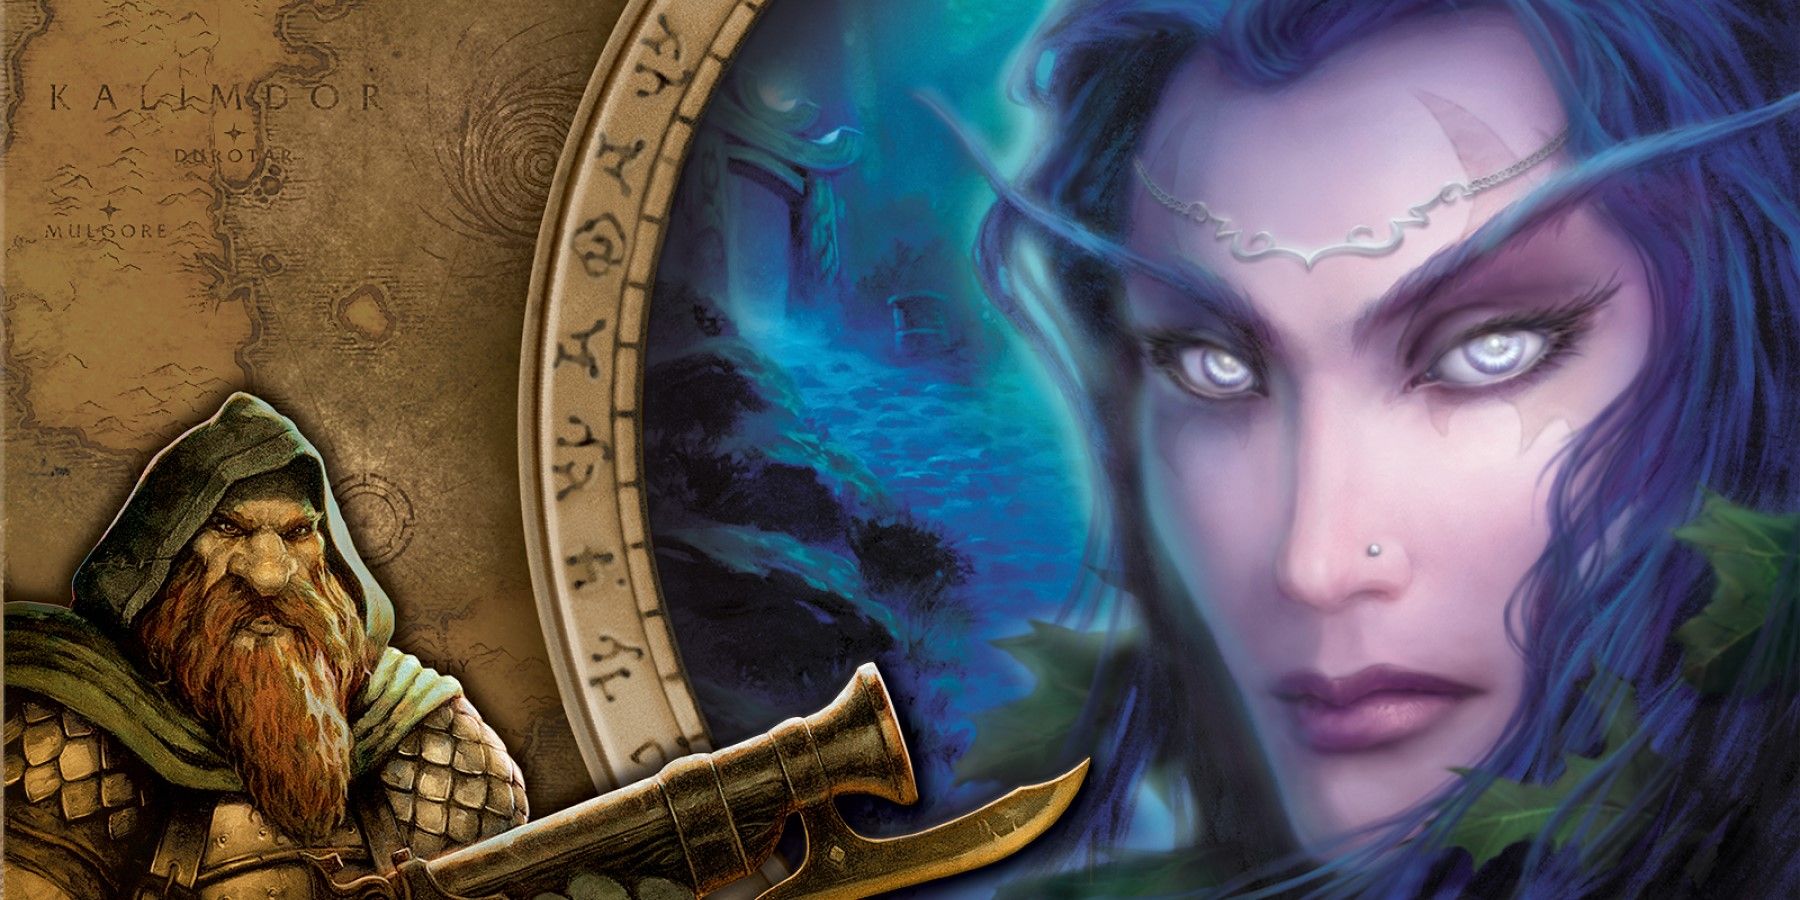 wallpaper from the original wow box art featuring a night elf woman's face and a dwarven gunner